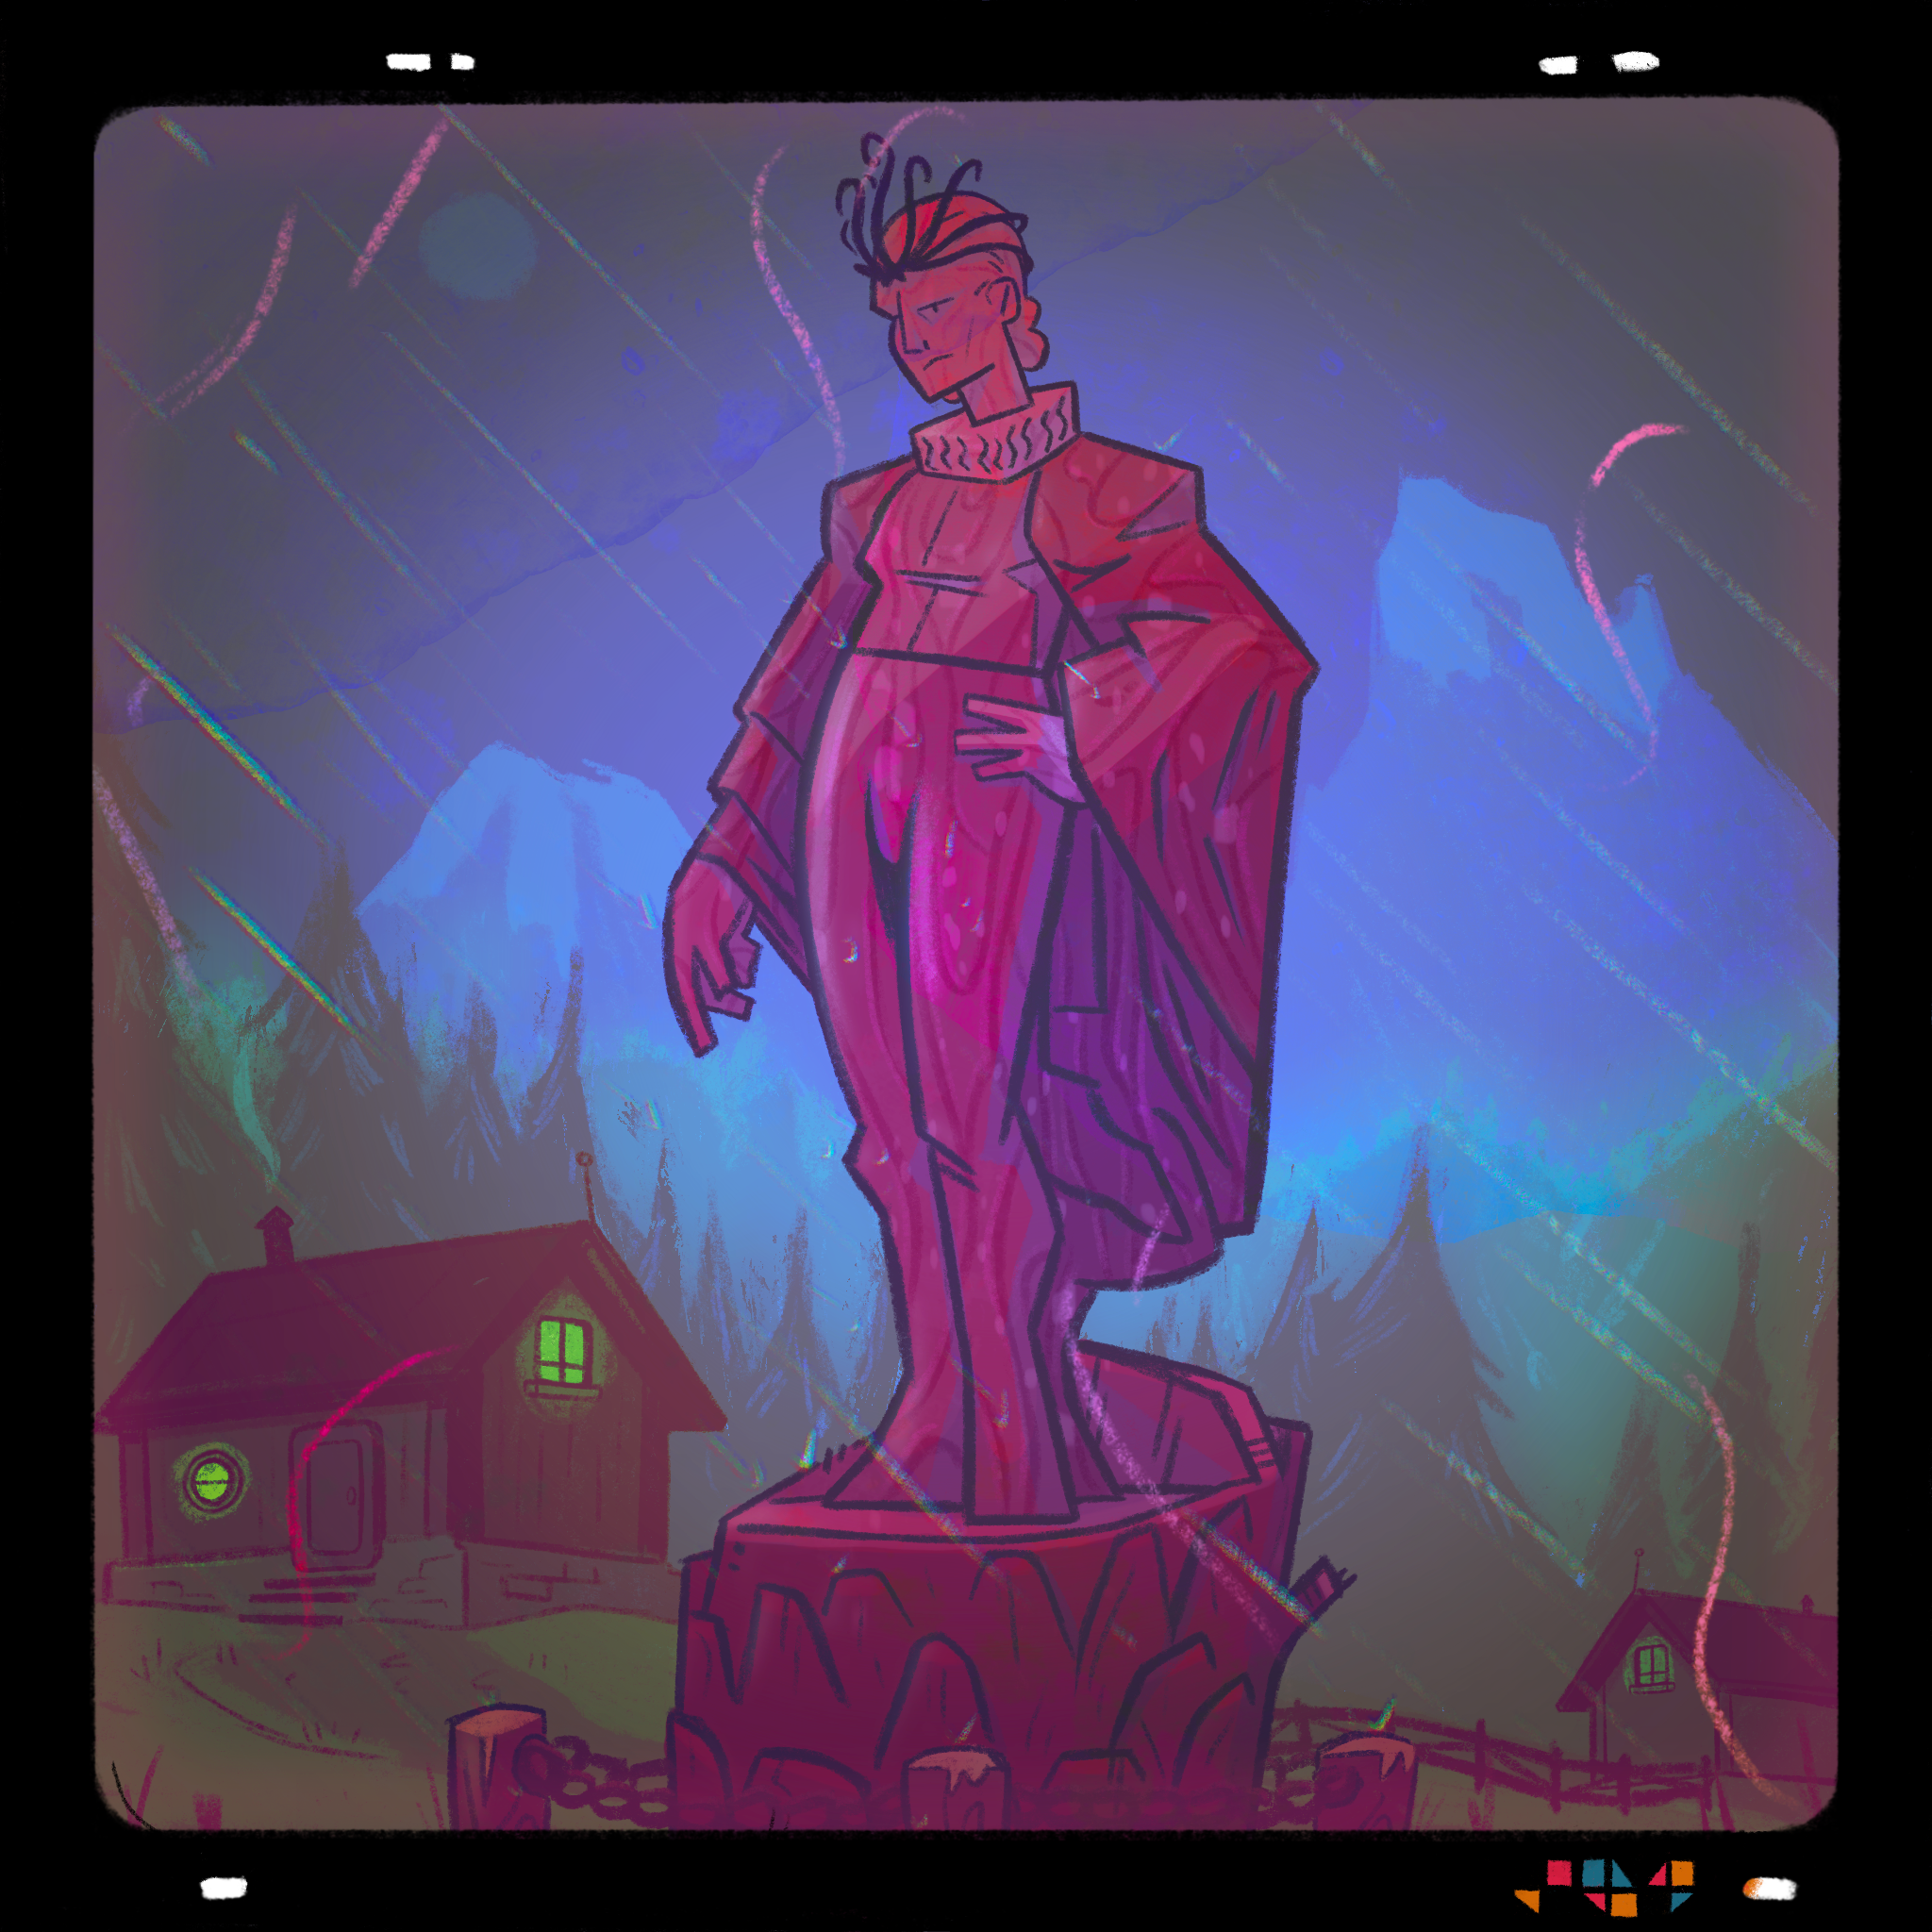 A digital drawing of a wooden statue of a person wearing a curling headdress, a ruff and a cloak with their hand on their hip, with a wooden house, a forest and mountains in the background.